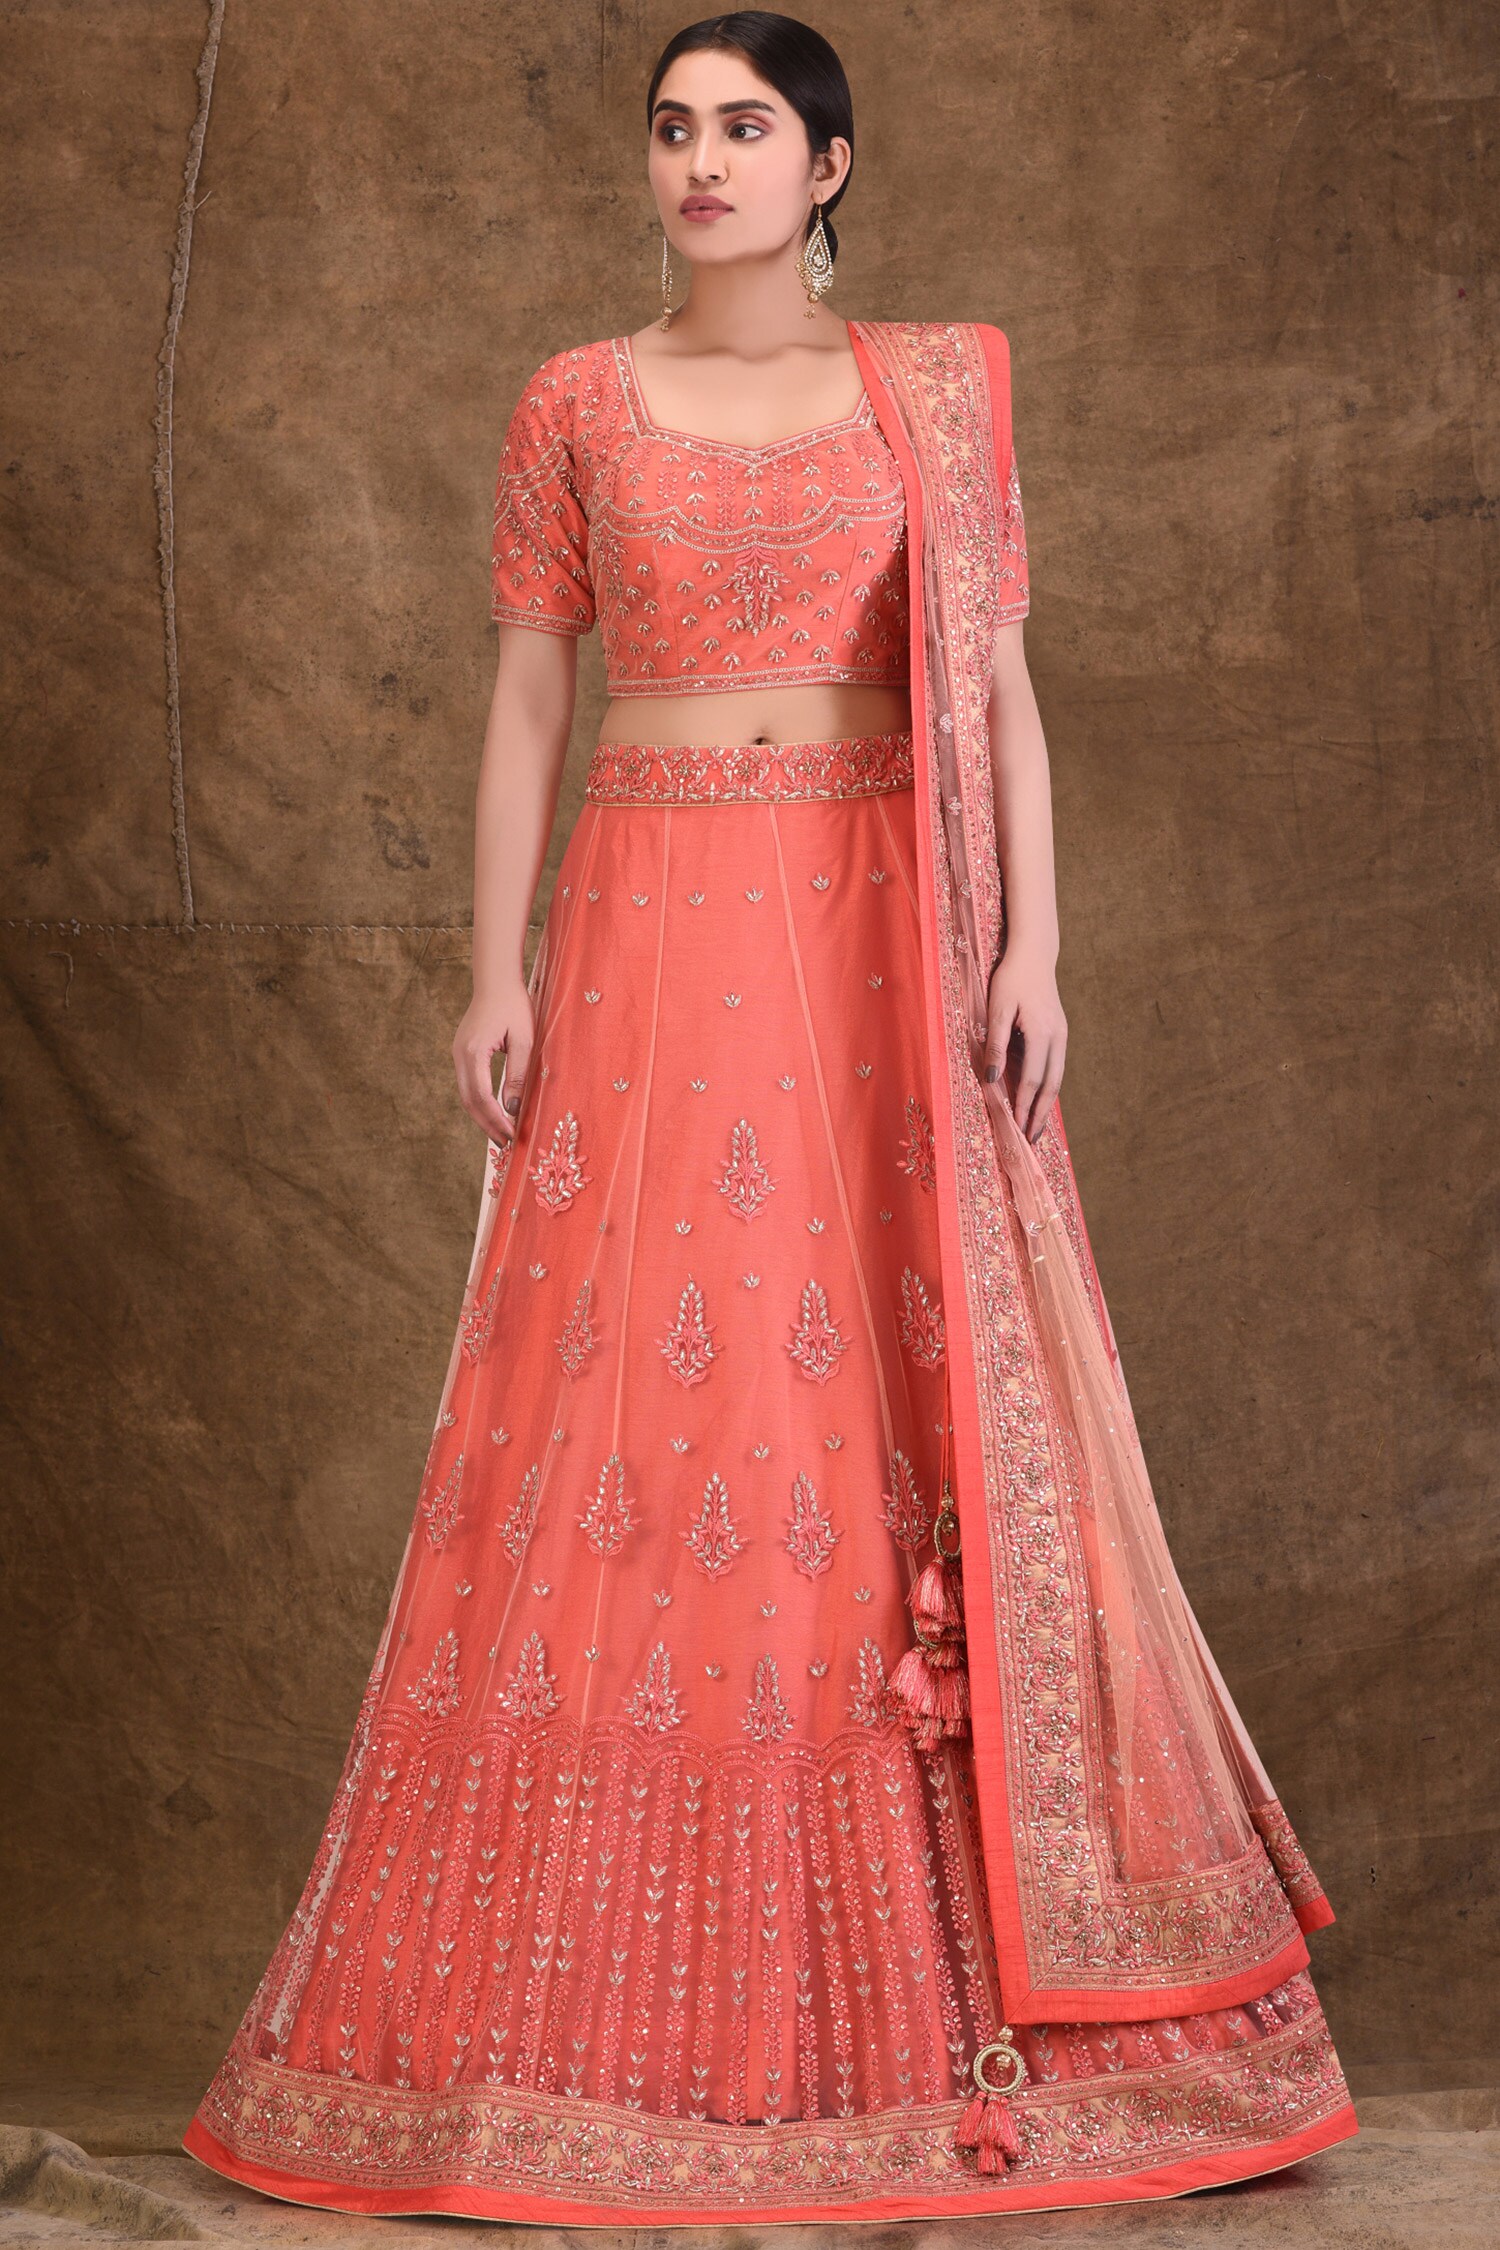 Ariyana Couture Coral Tafetta Square Neck Embroidered Lehenga Set For Women